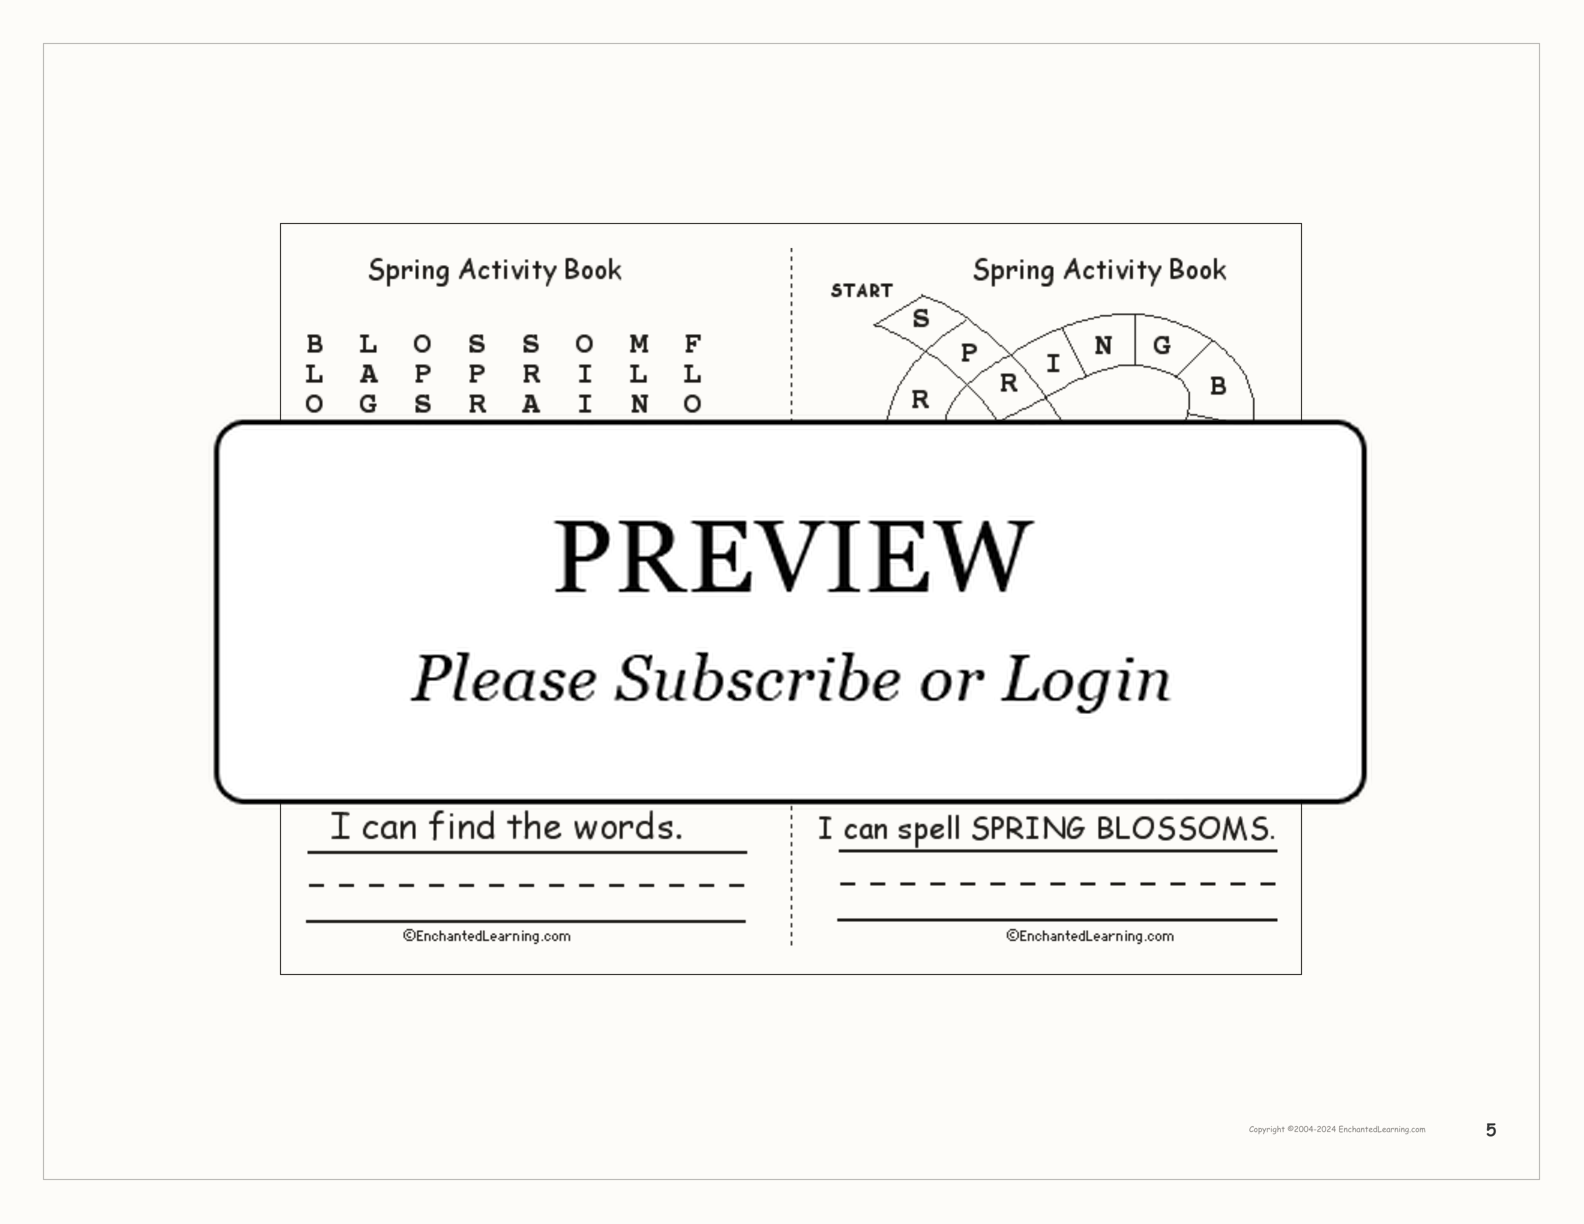 Spring Activity Book interactive worksheet page 5